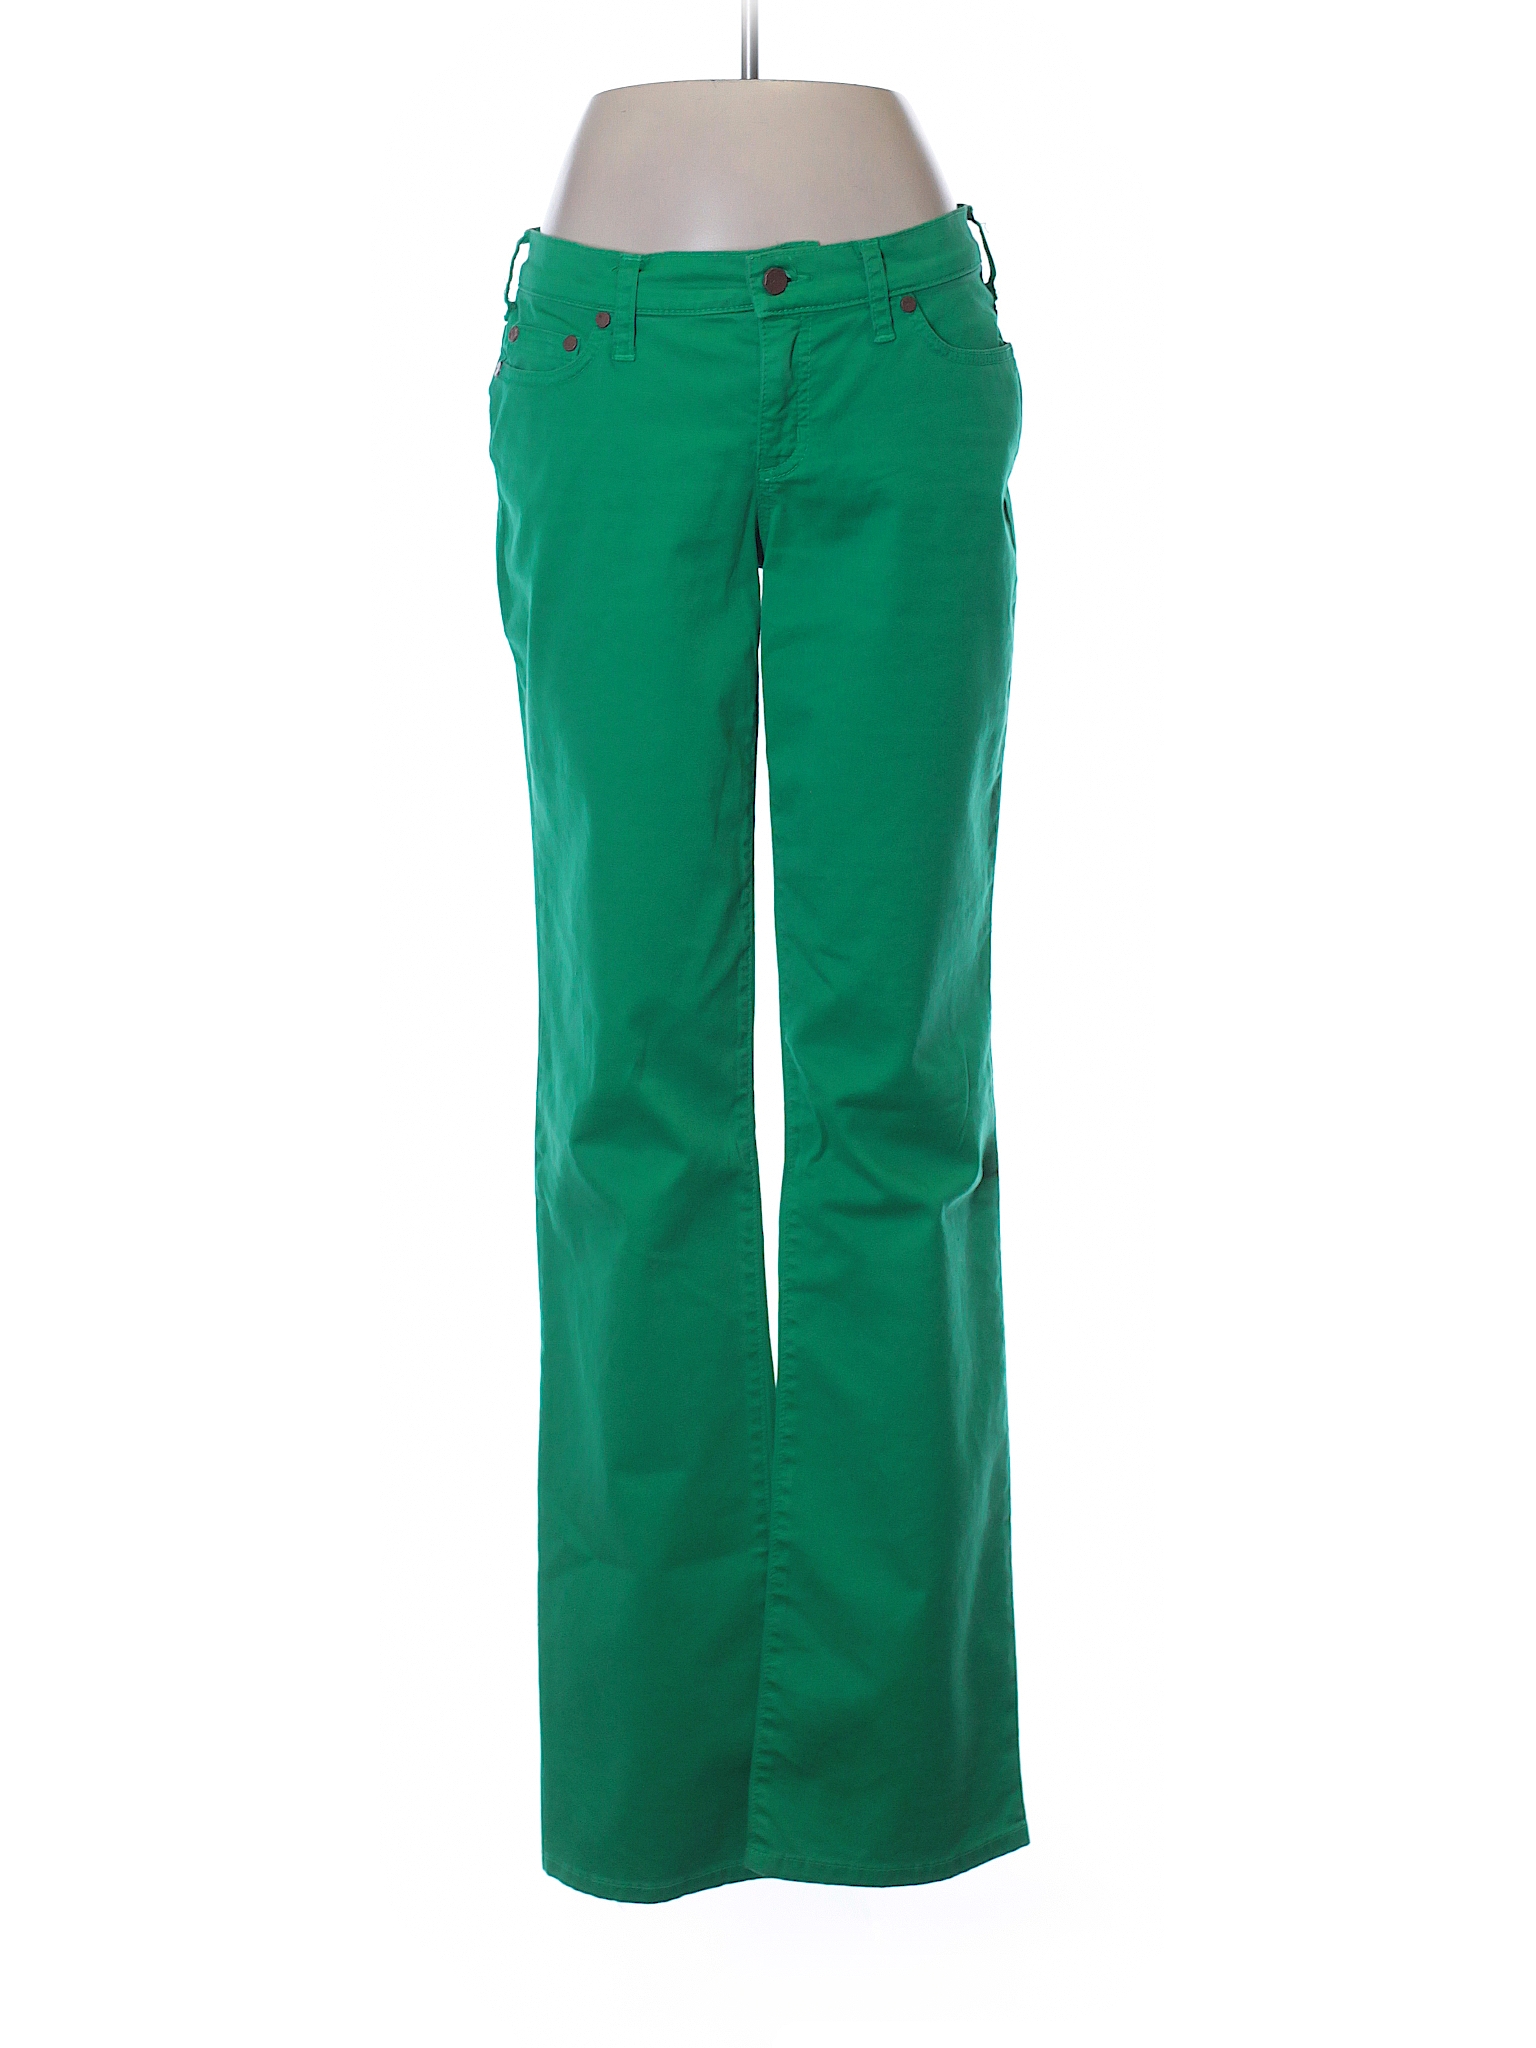 pure color Solid Green Jeans 28 Waist - 66% off | thredUP